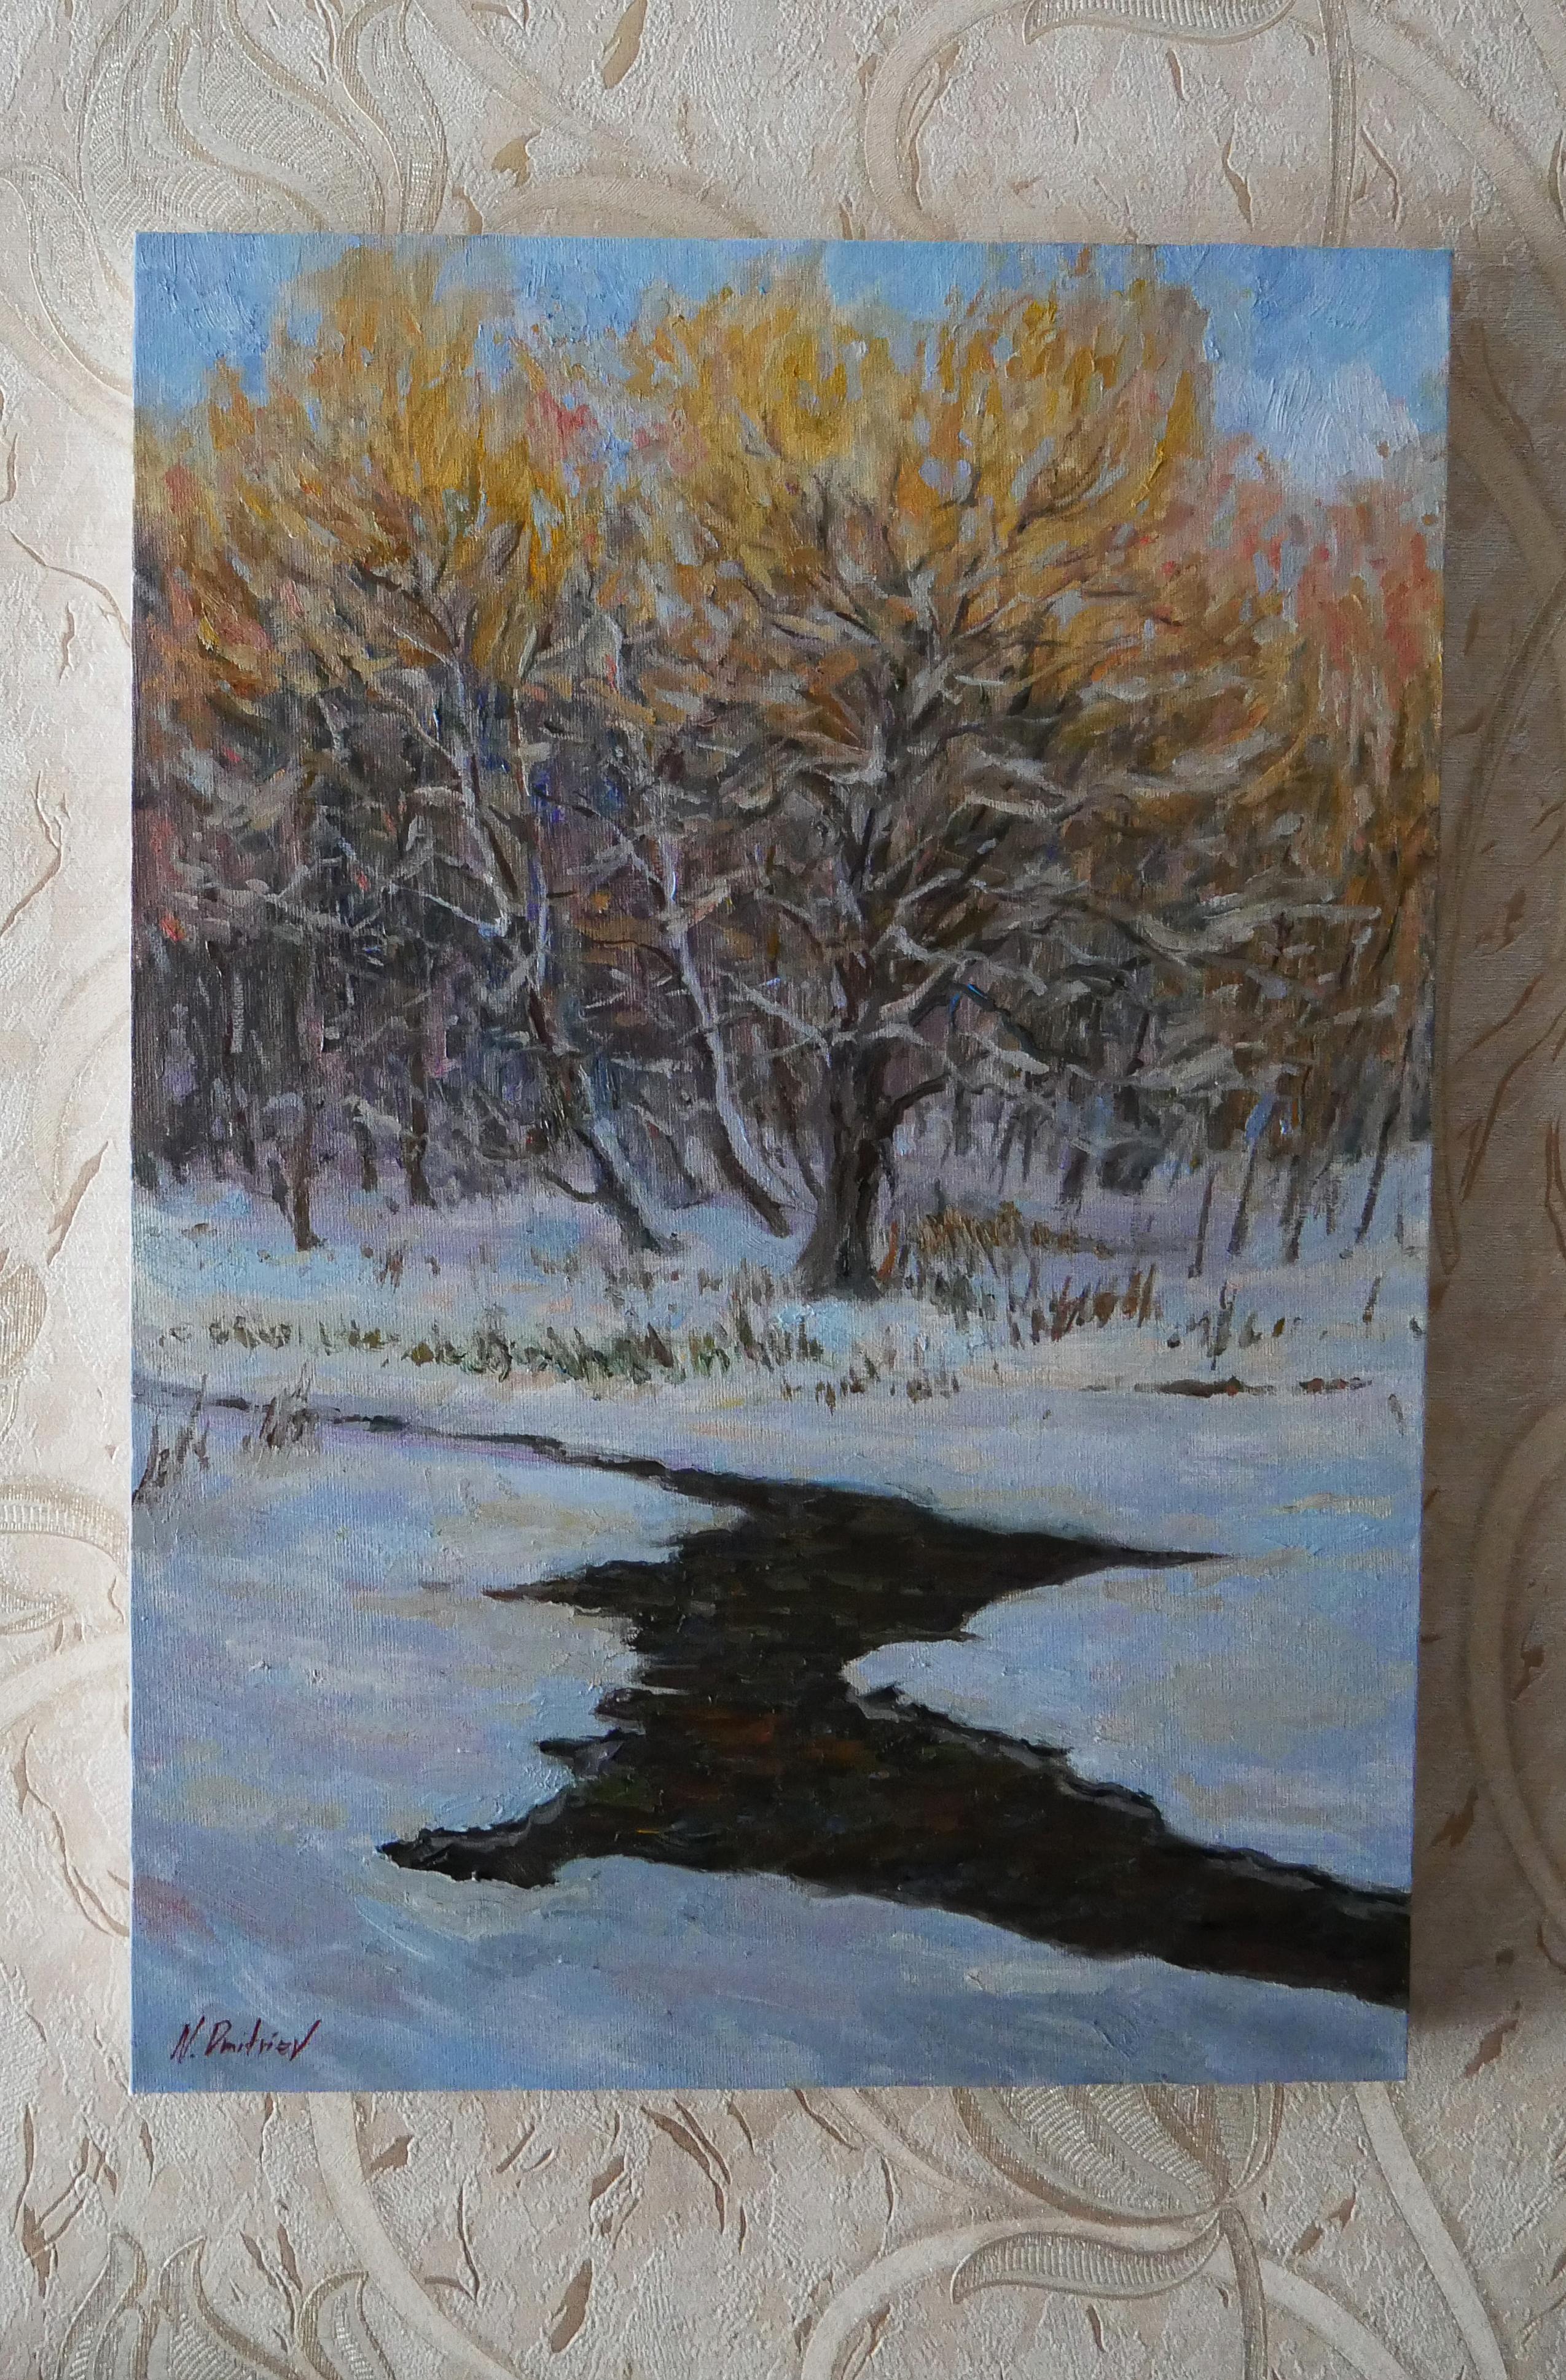 The dark spot of the river looks beautiful against the background of light snow. Sunlit treetops with warm sunlight and the blue hues of the snow create the atmosphere of a winter evening.

The painting is author's and original. It is signed on the